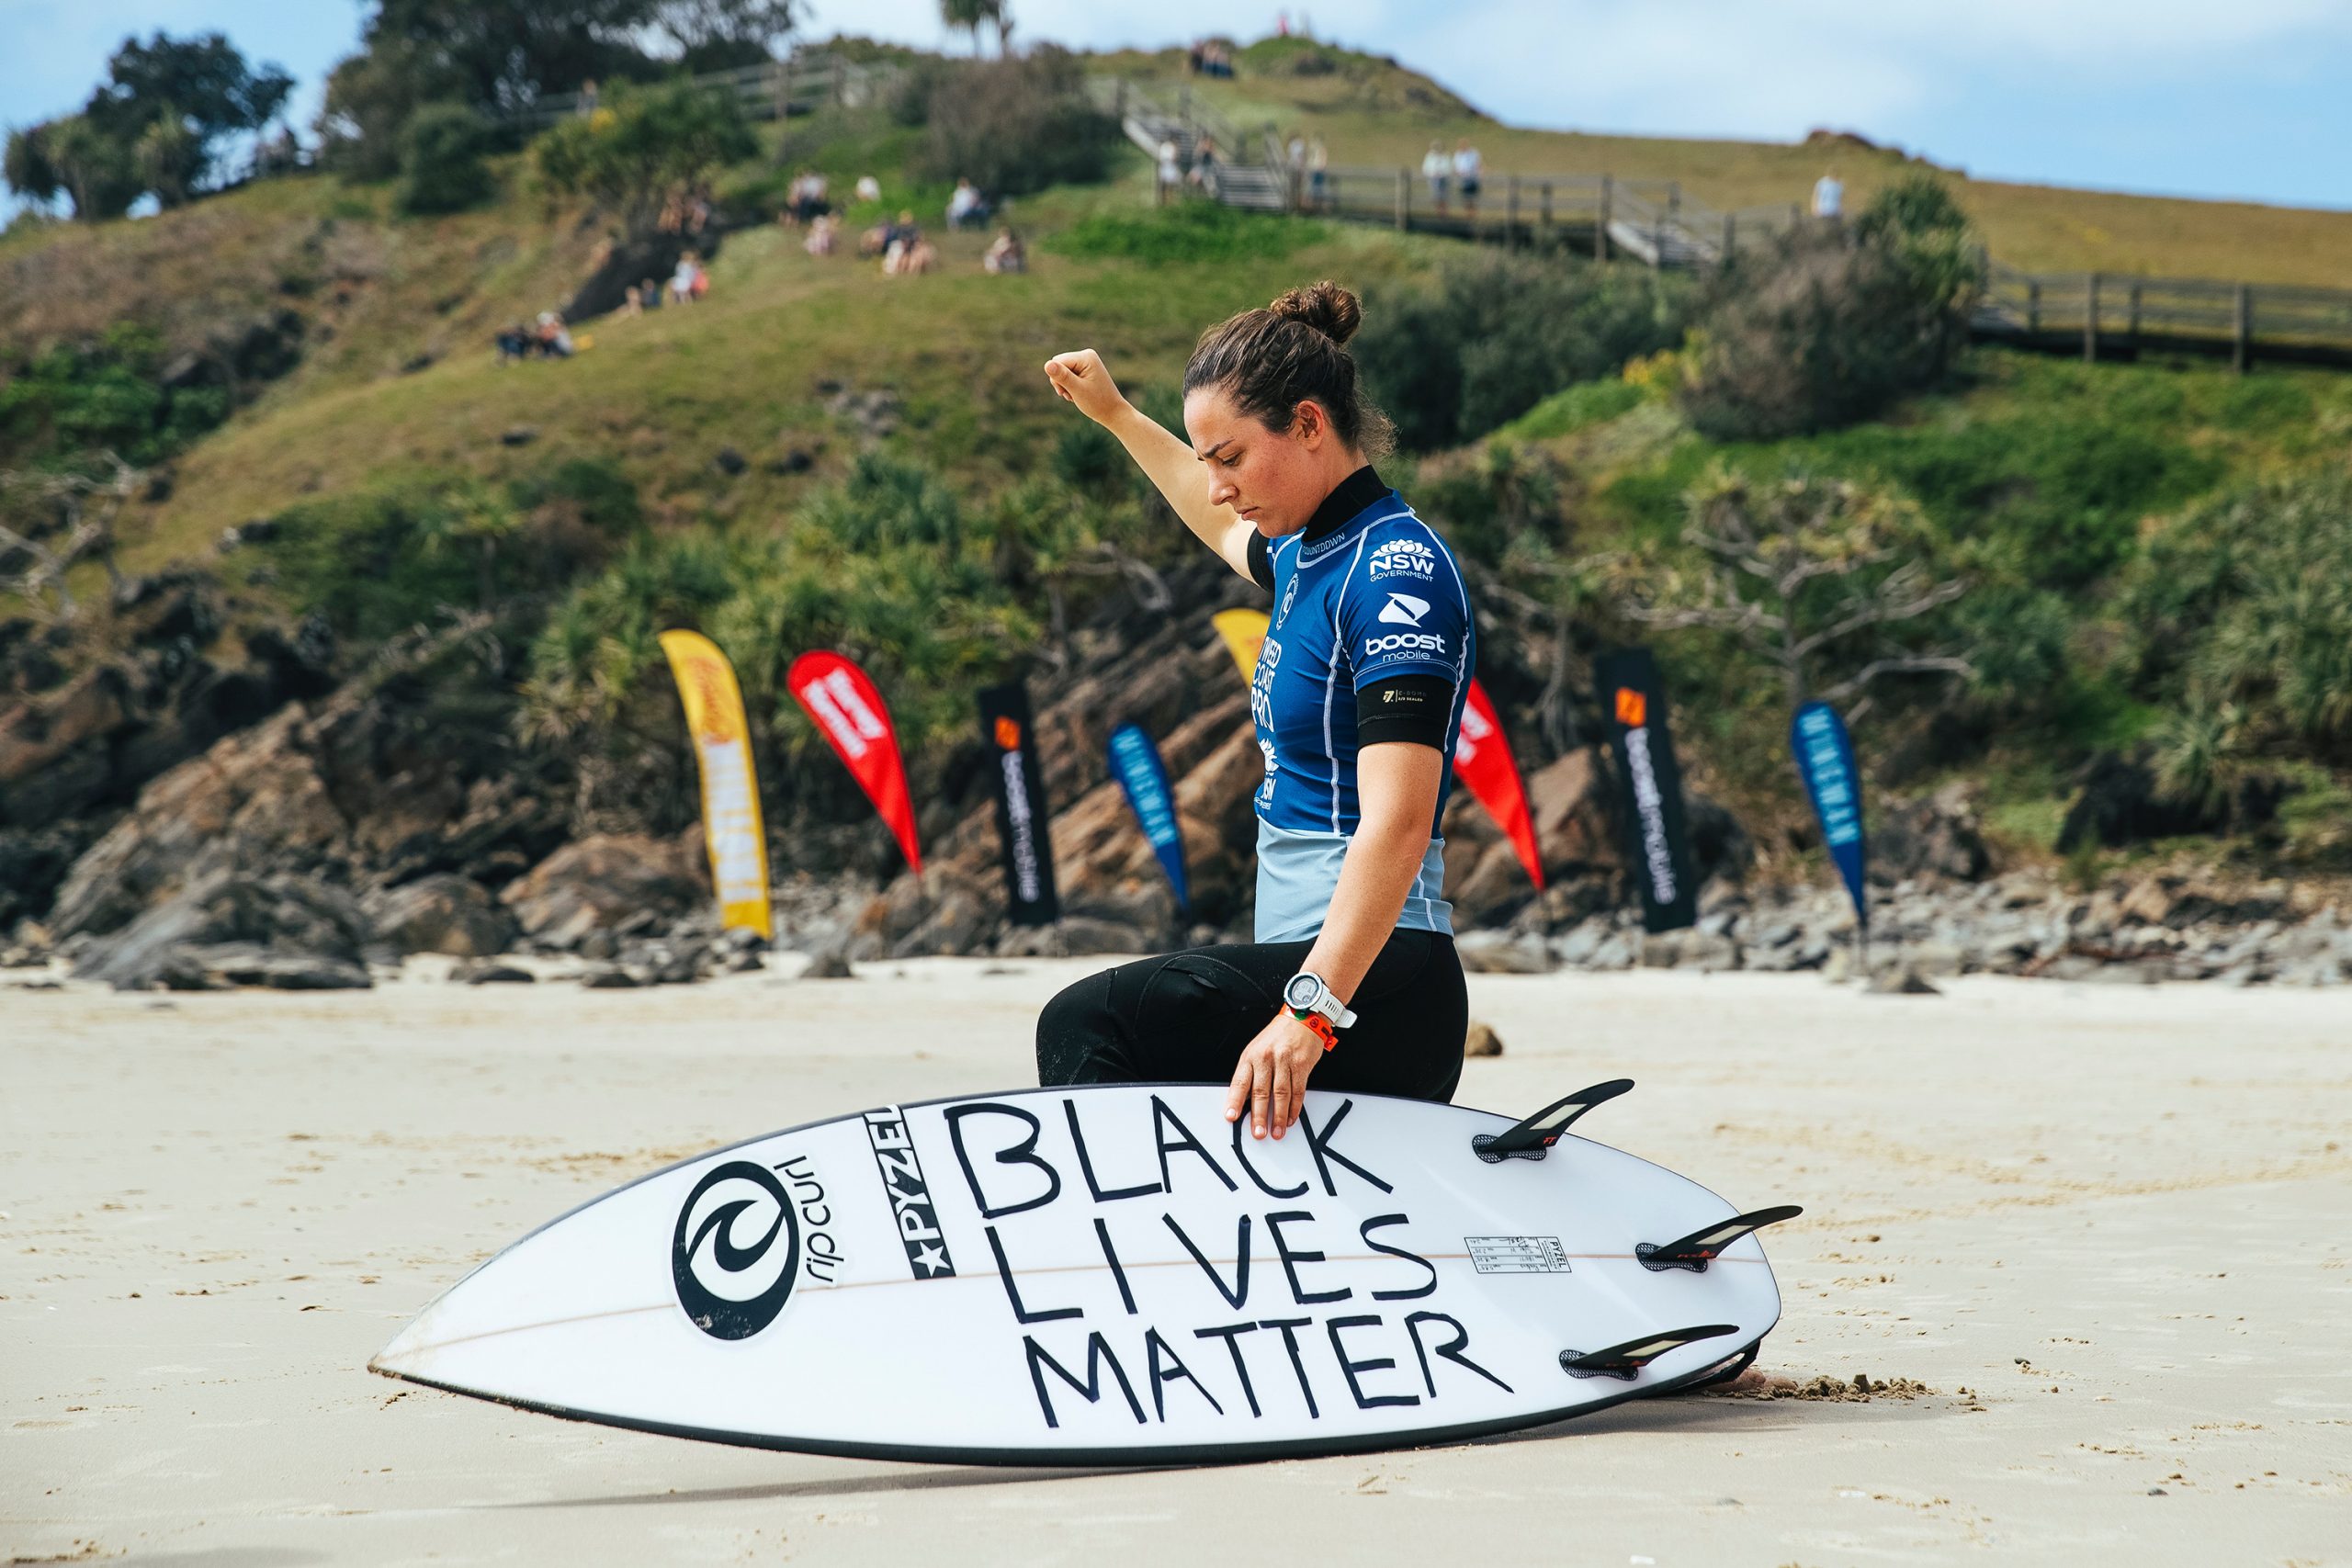 TWEED HEADS SOUTH, AUSTRALIA - SEPTEMBER 13: Tyler Wright, two-time World Surf League Champion, takes a knee in solidarity with Black Lives Matter ahead of her heat today at the Tweed Coast Pro event on September 13, 2020 in Tweed Heads South, Australia, part of the Australian Grand Slam of Surfing and the second event of The WSL Countdown. Wright knelt for 439 seconds - one second for every First Nations person in Australia who has lost their life in police custody since 1991. (Photo by Matt Dunbar/World Surf League via Getty Images)